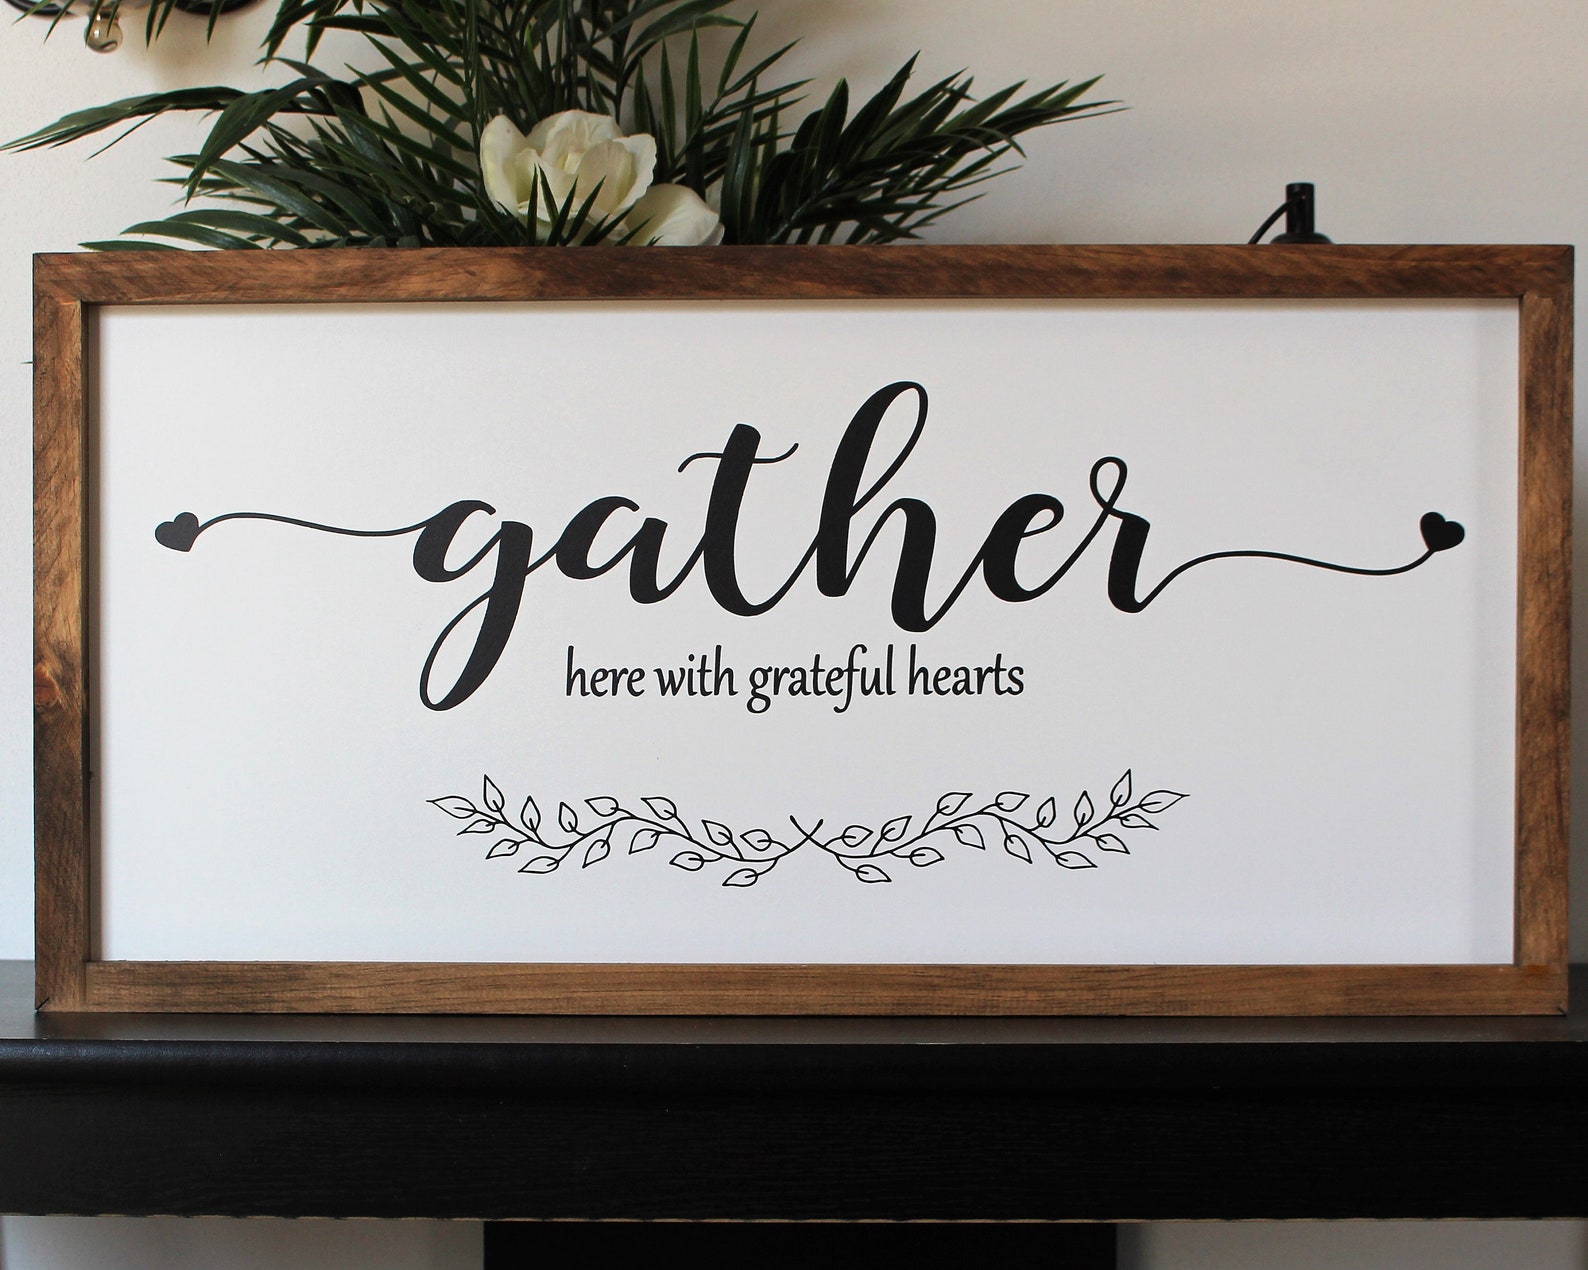 Gather here